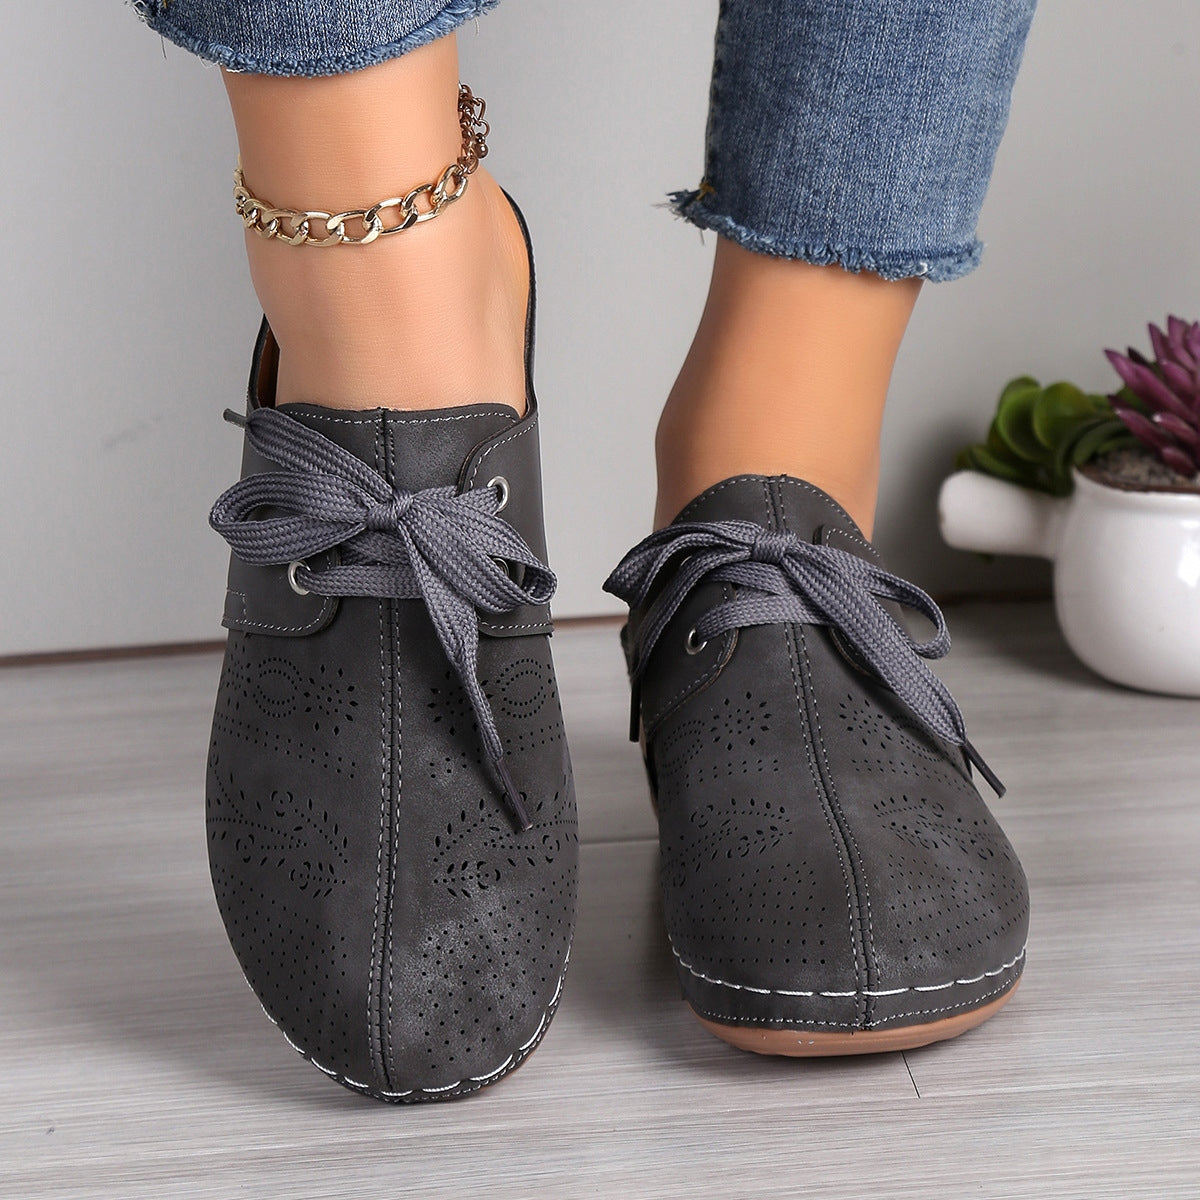 Lace-Up Round Toe Wedge Sandals Dark Gray